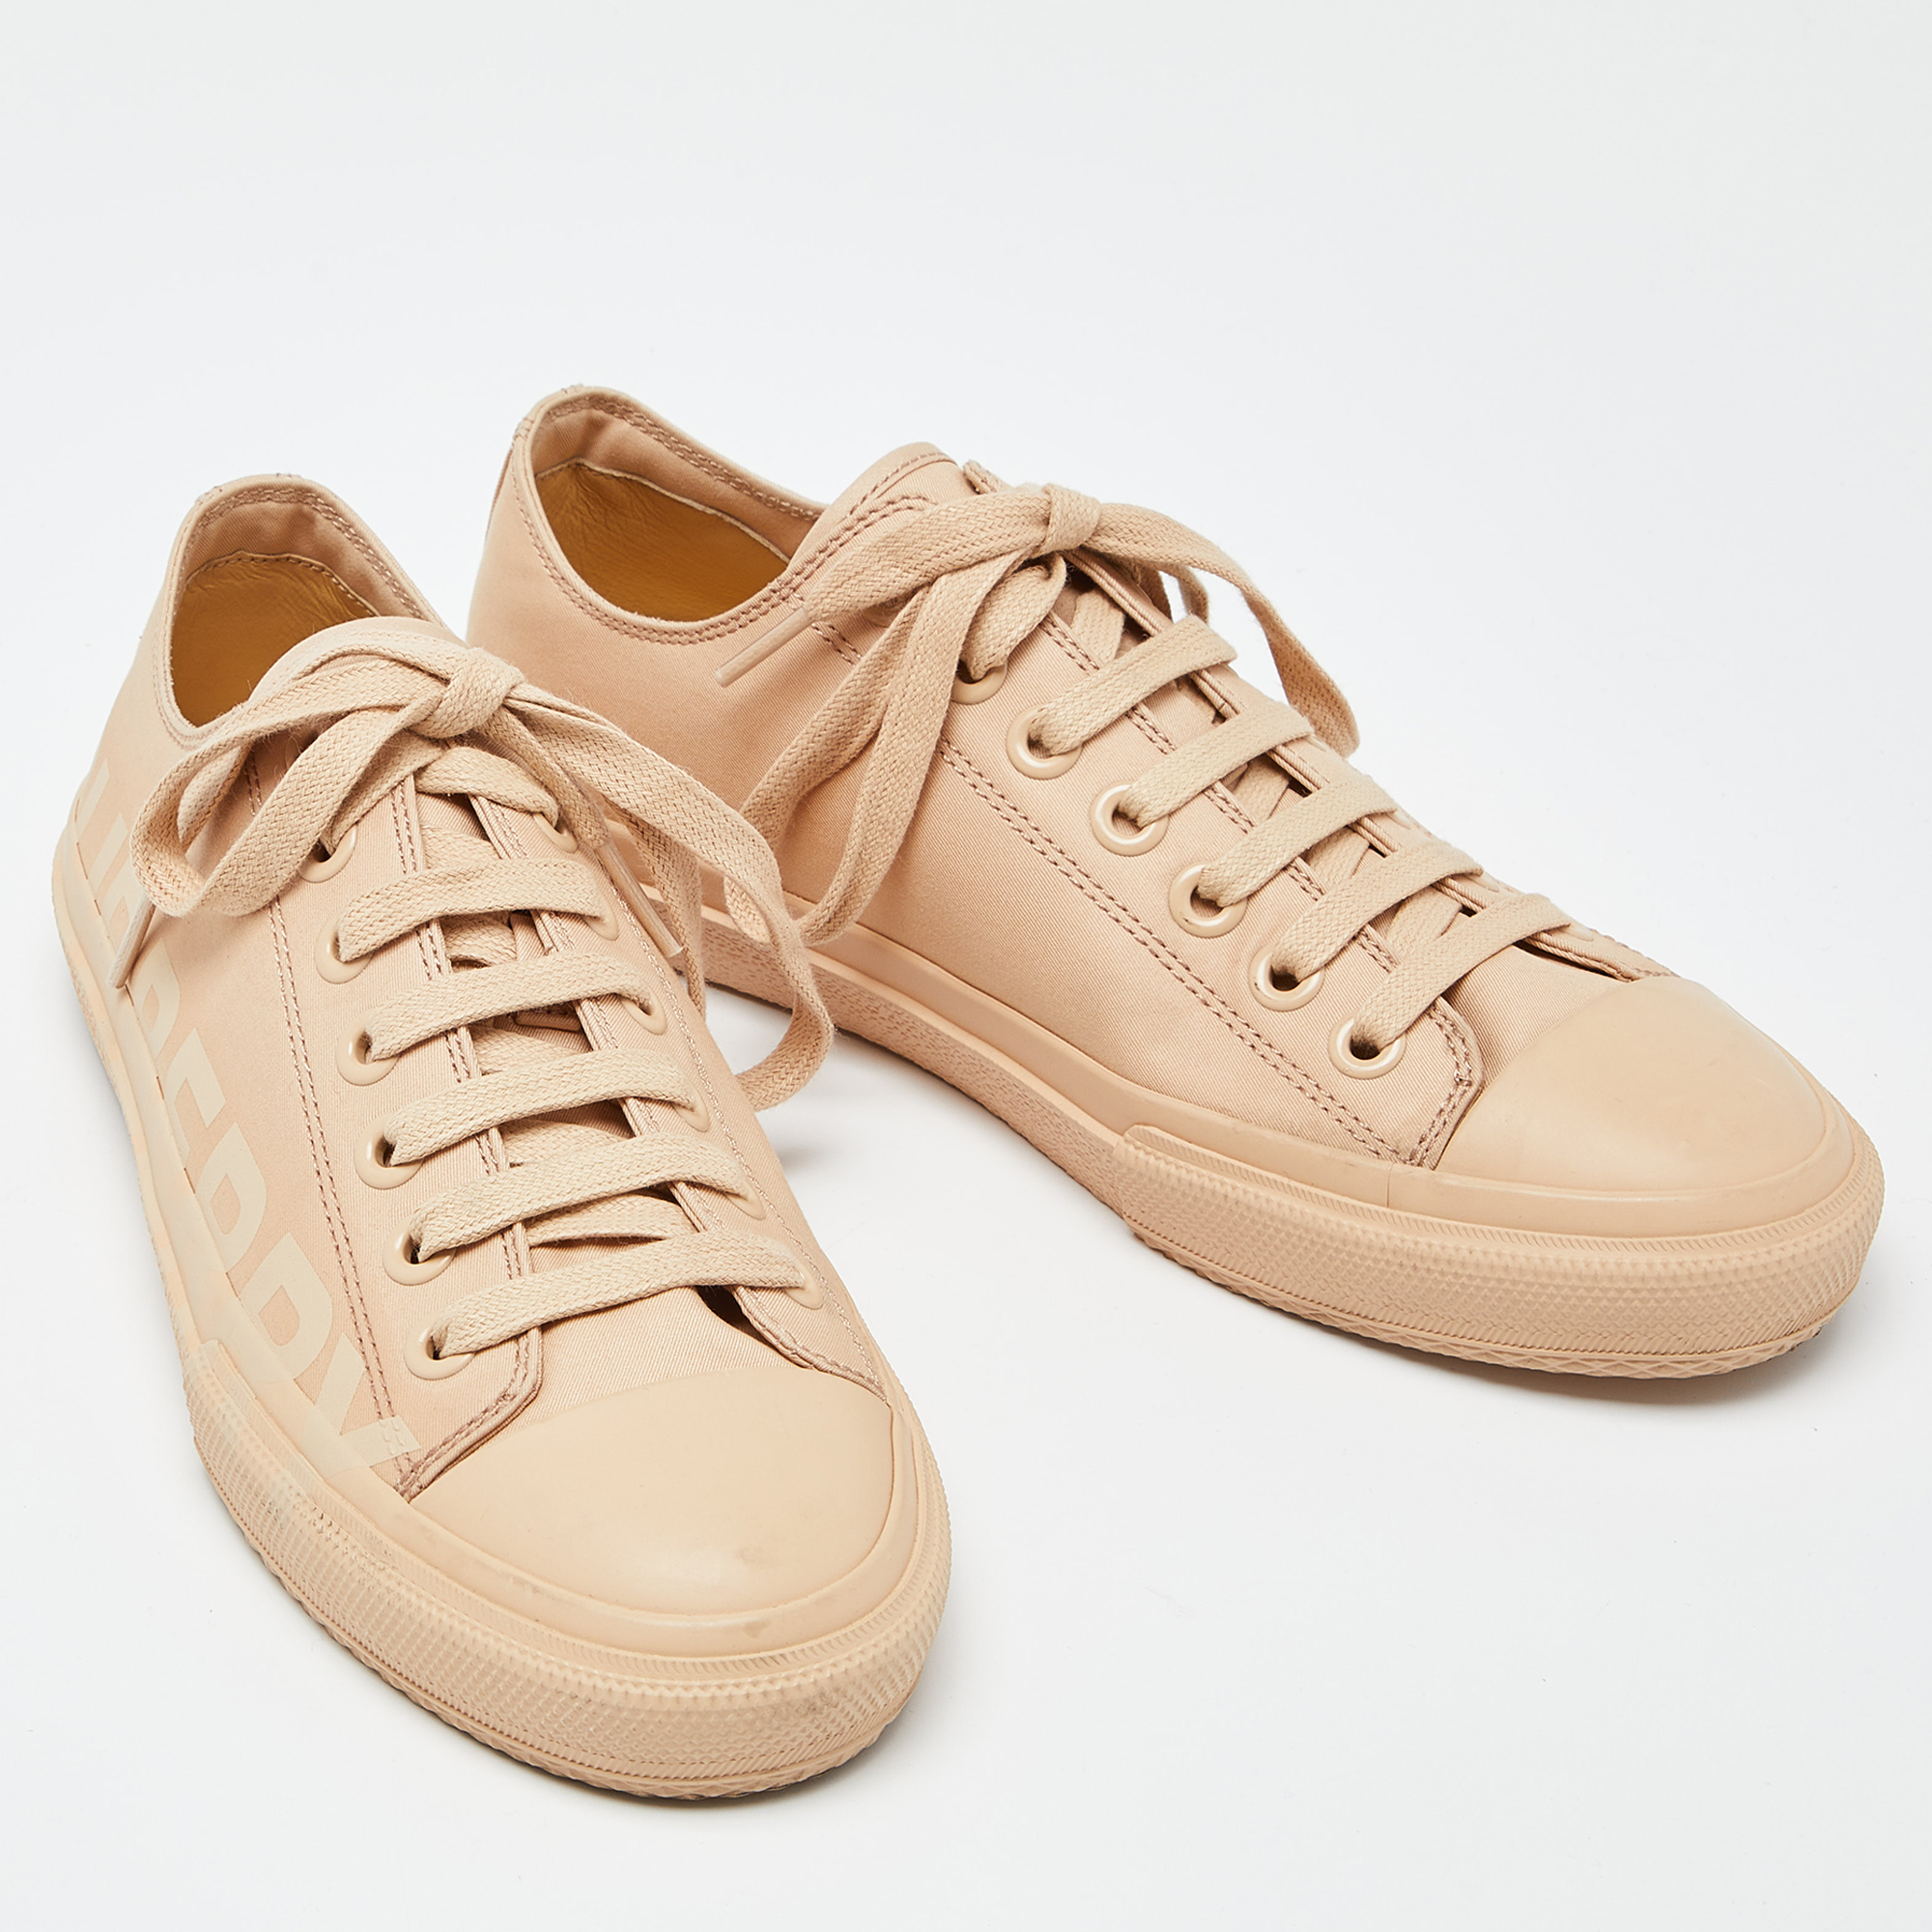 Burberry Beige Logo Print Canvas Sneakers Size 39